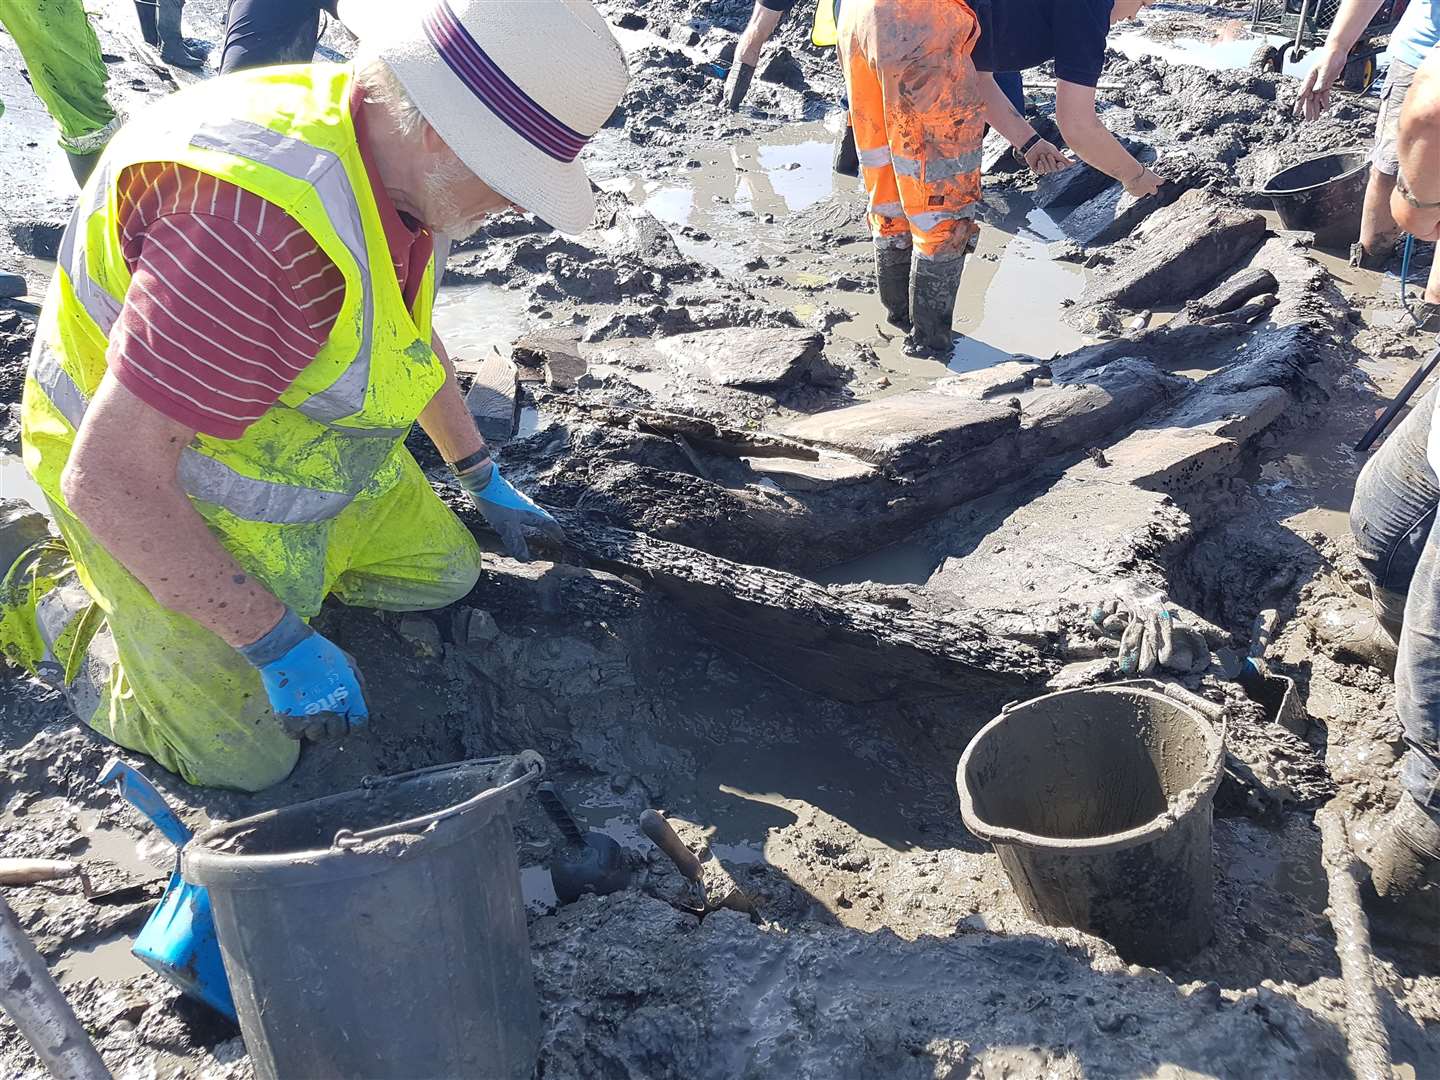 Experts believe the ship was ocean going after discovering remnants of a galley on board